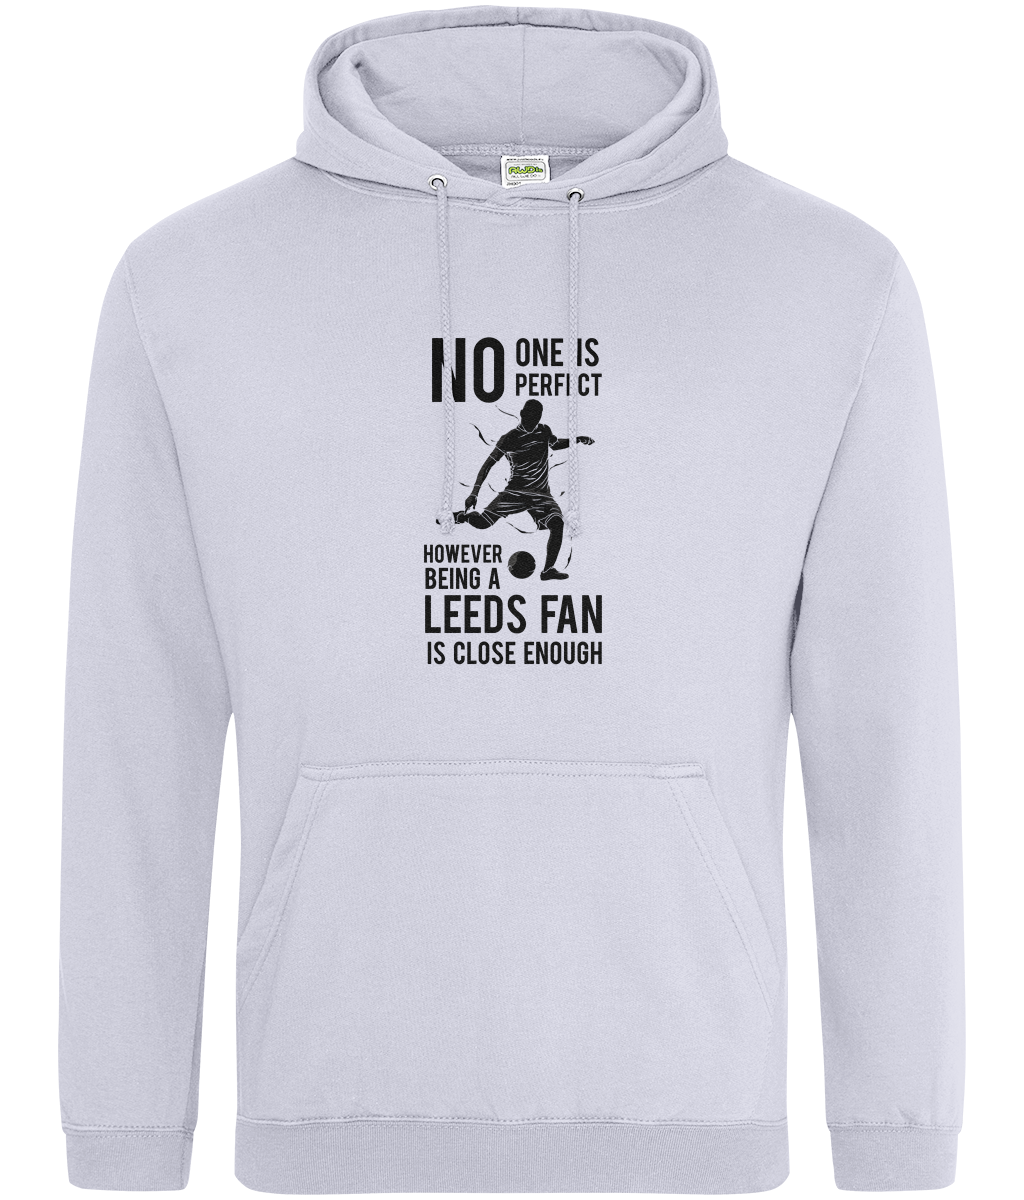 No One Is Perfect However Bing A Leeds Fan Is Close Enough Hoodie Women